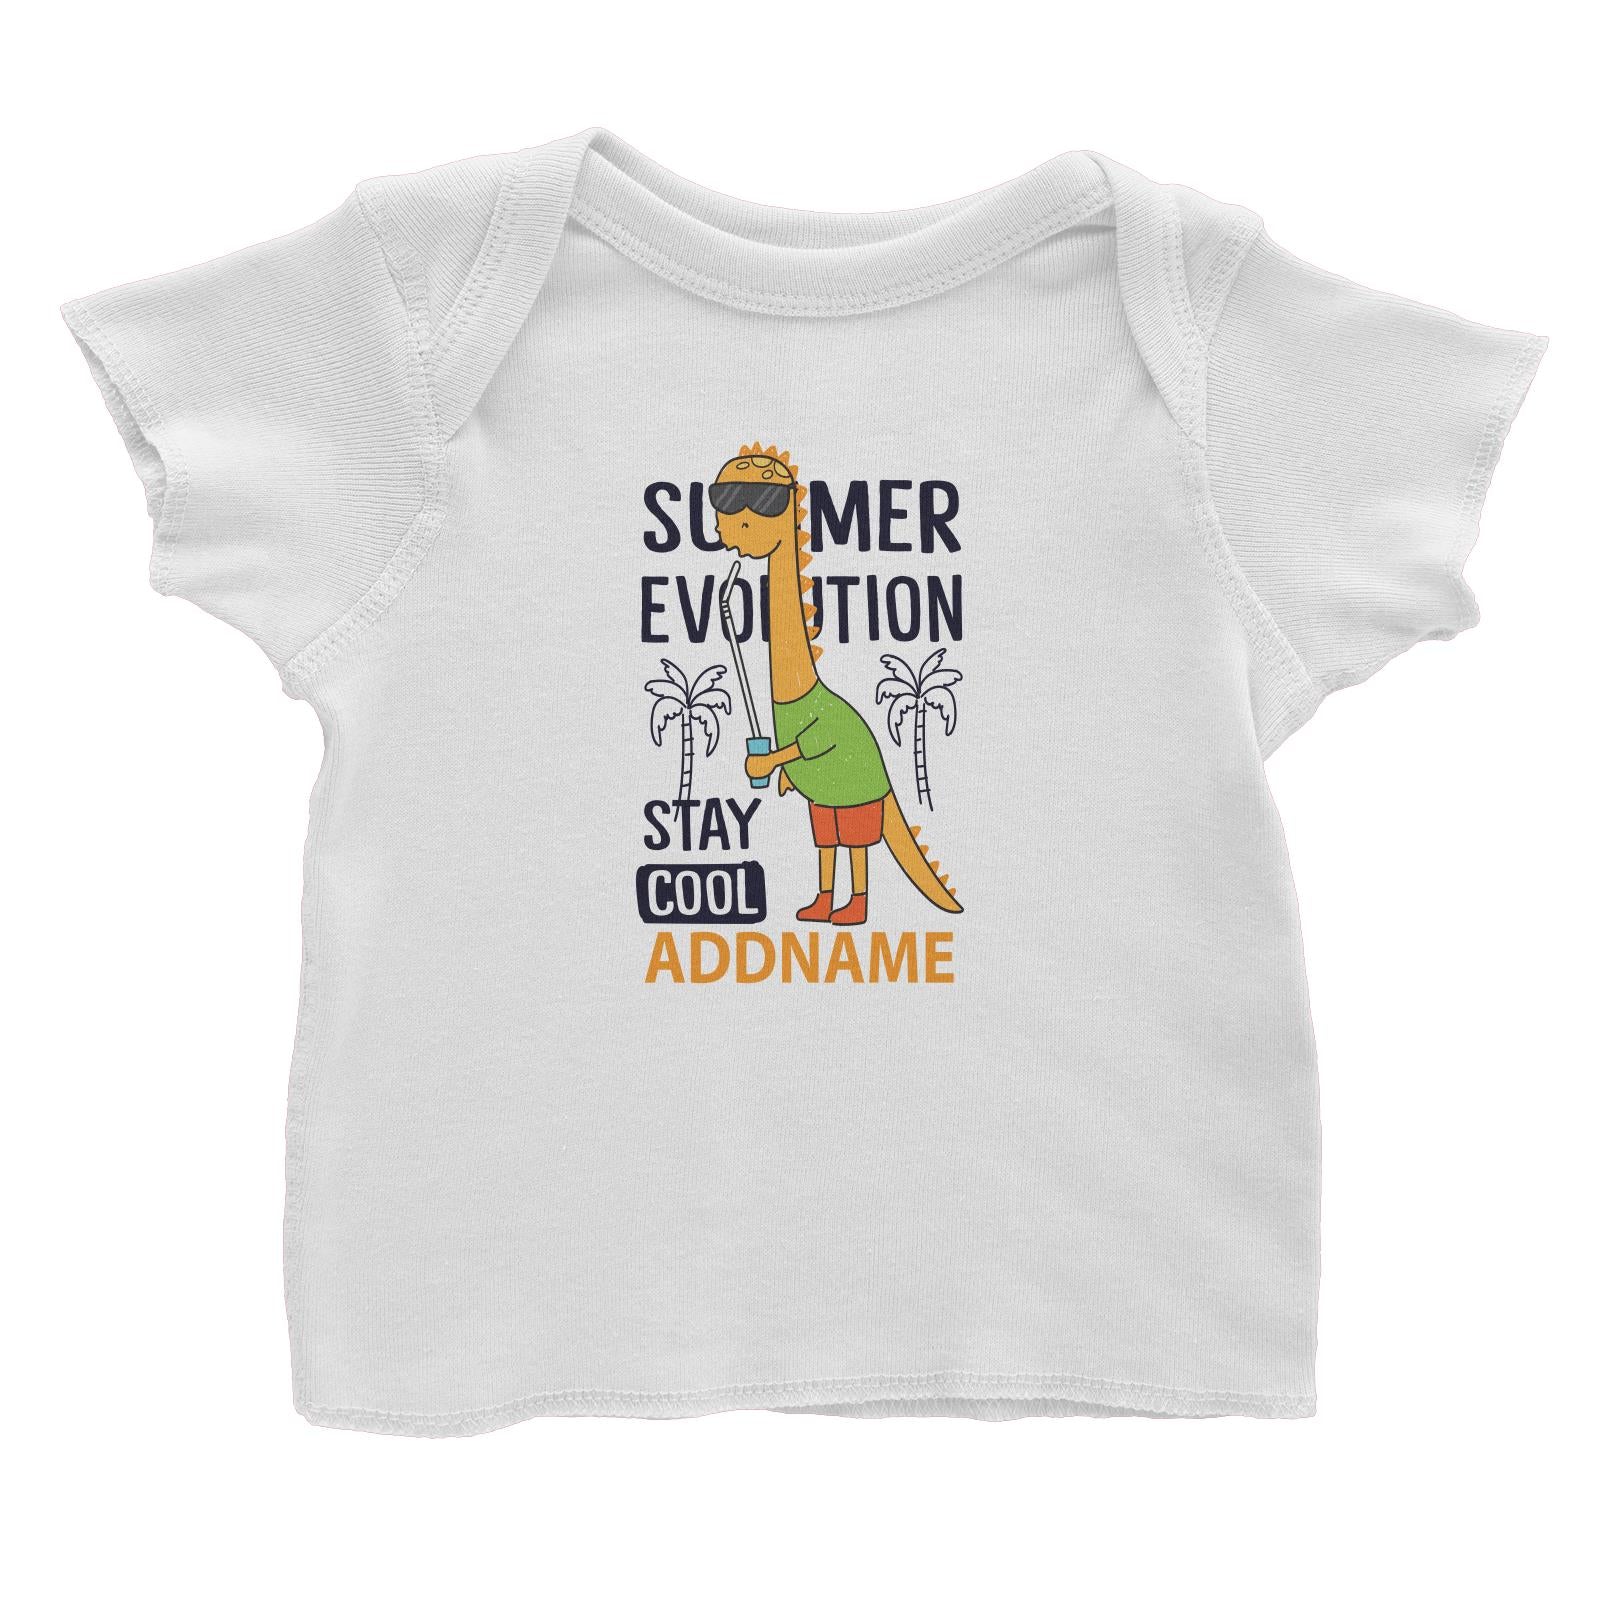 Cool Cute Dinosaur Summer Evolution Stay Cool Addname Baby T-Shirt